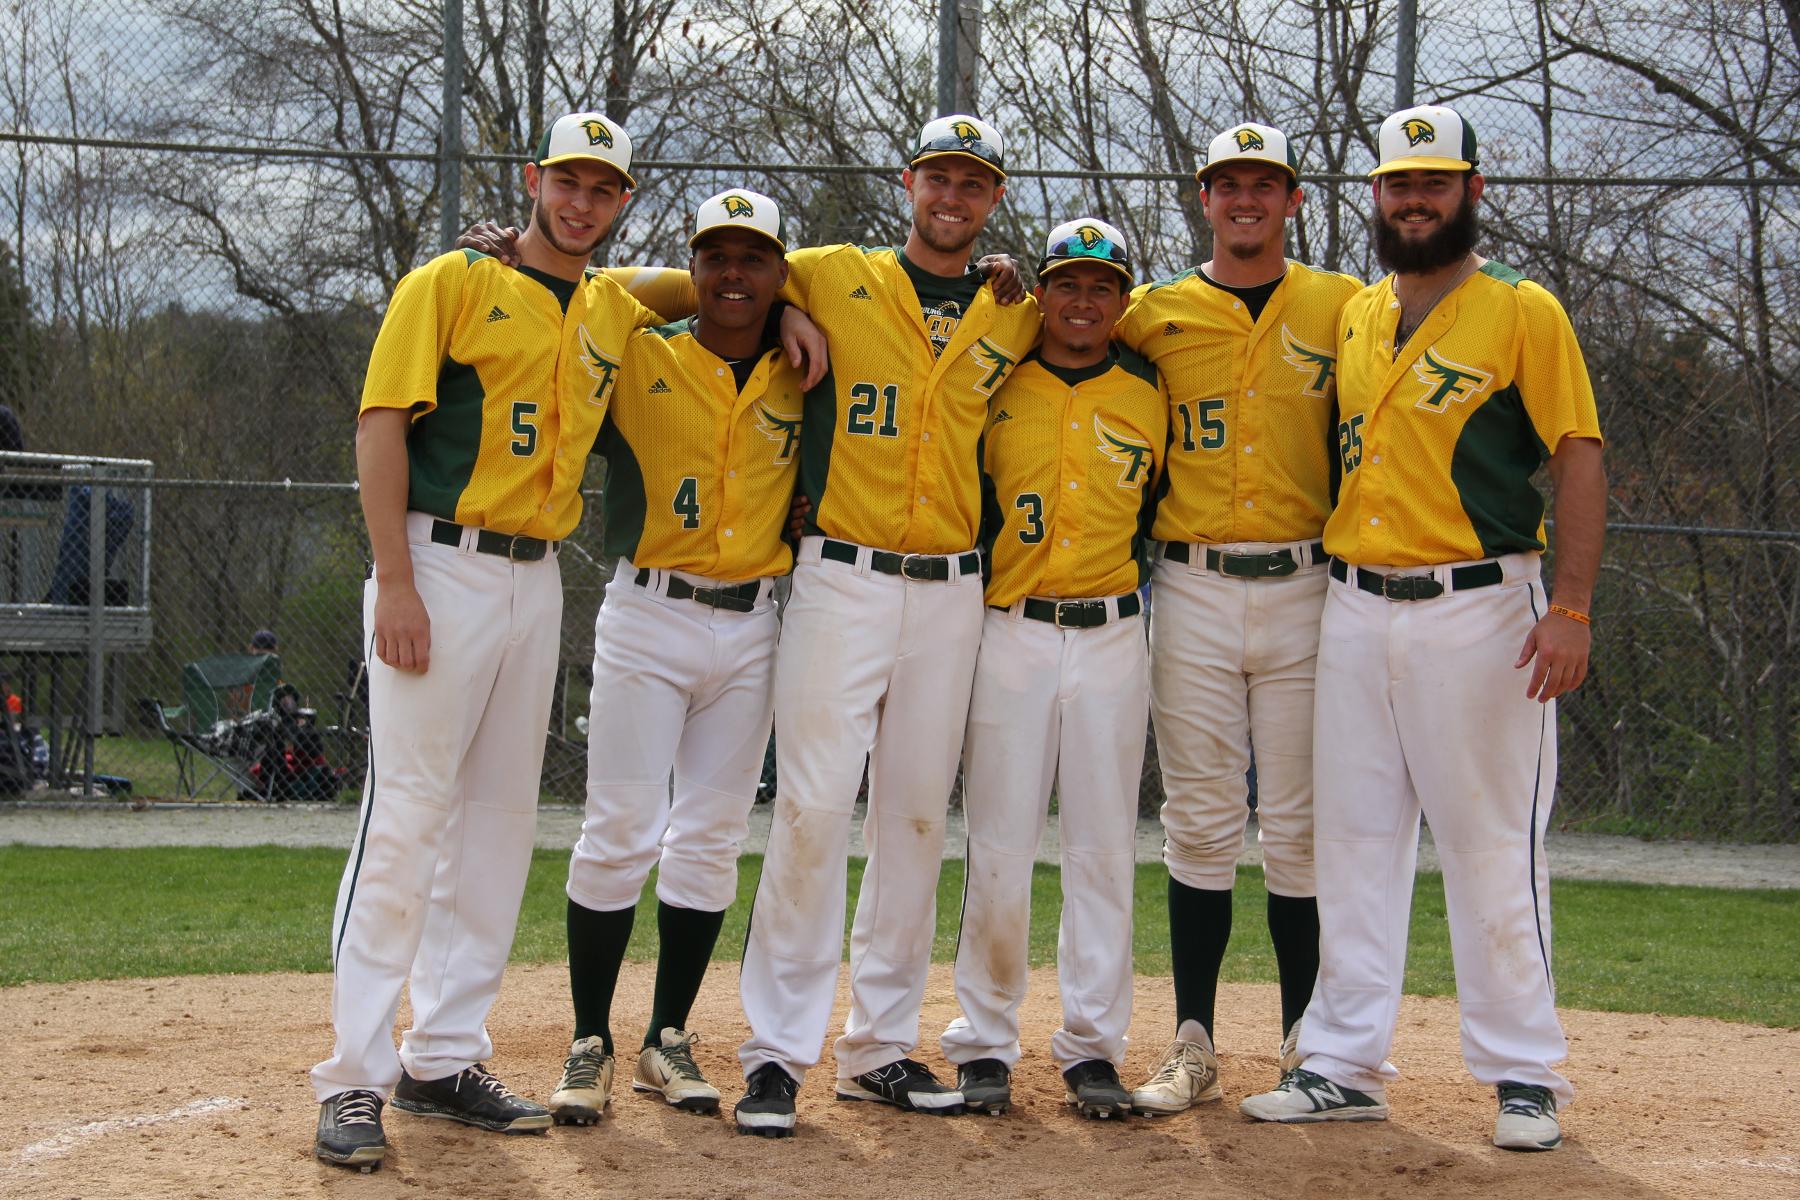 Falcons Go 1-1 vs. First-Place Salem State on Senior Day